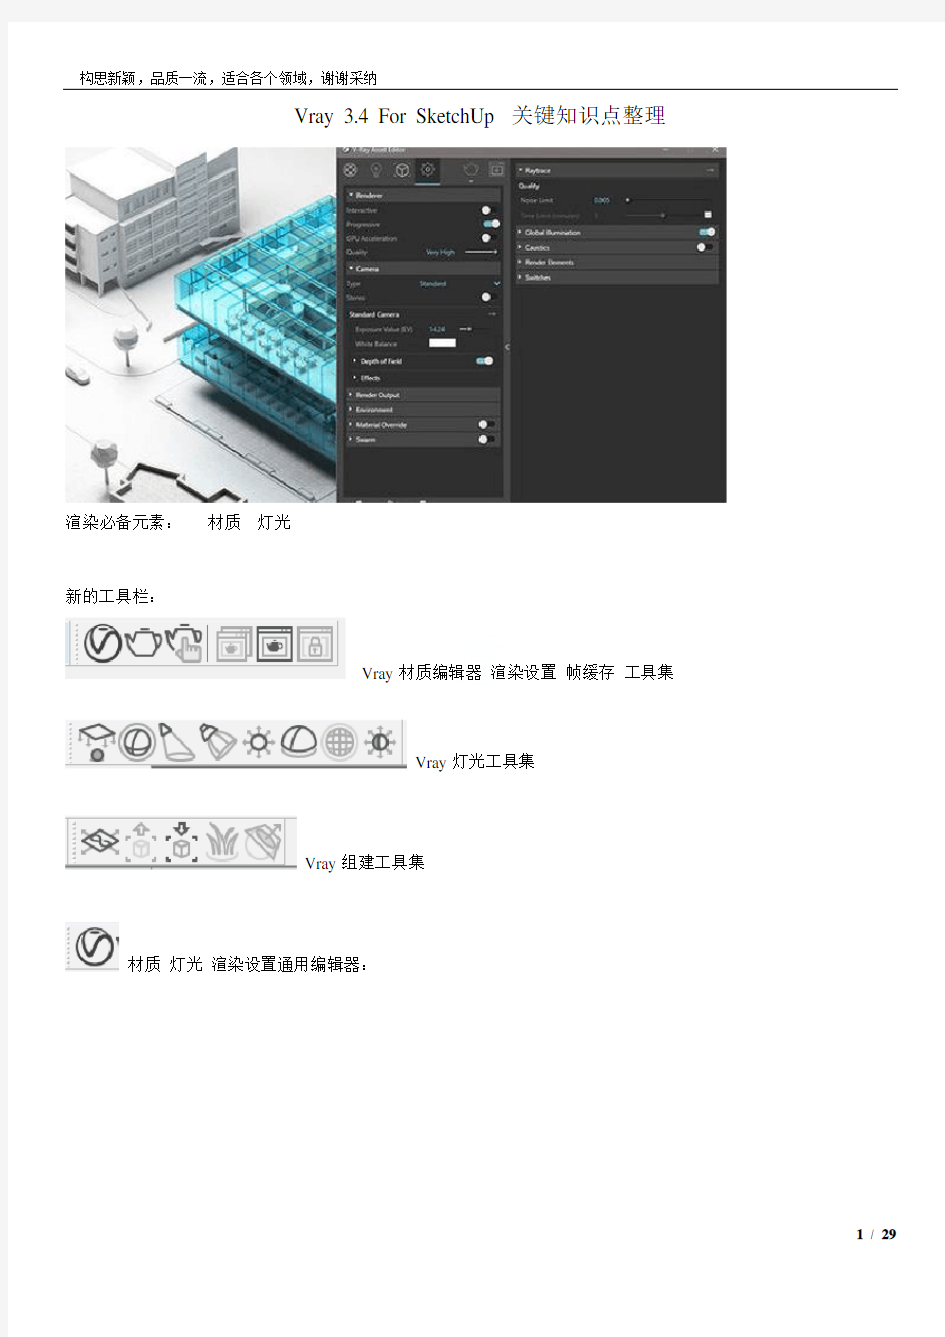 Vray 3.4 For SketchUp2019教程